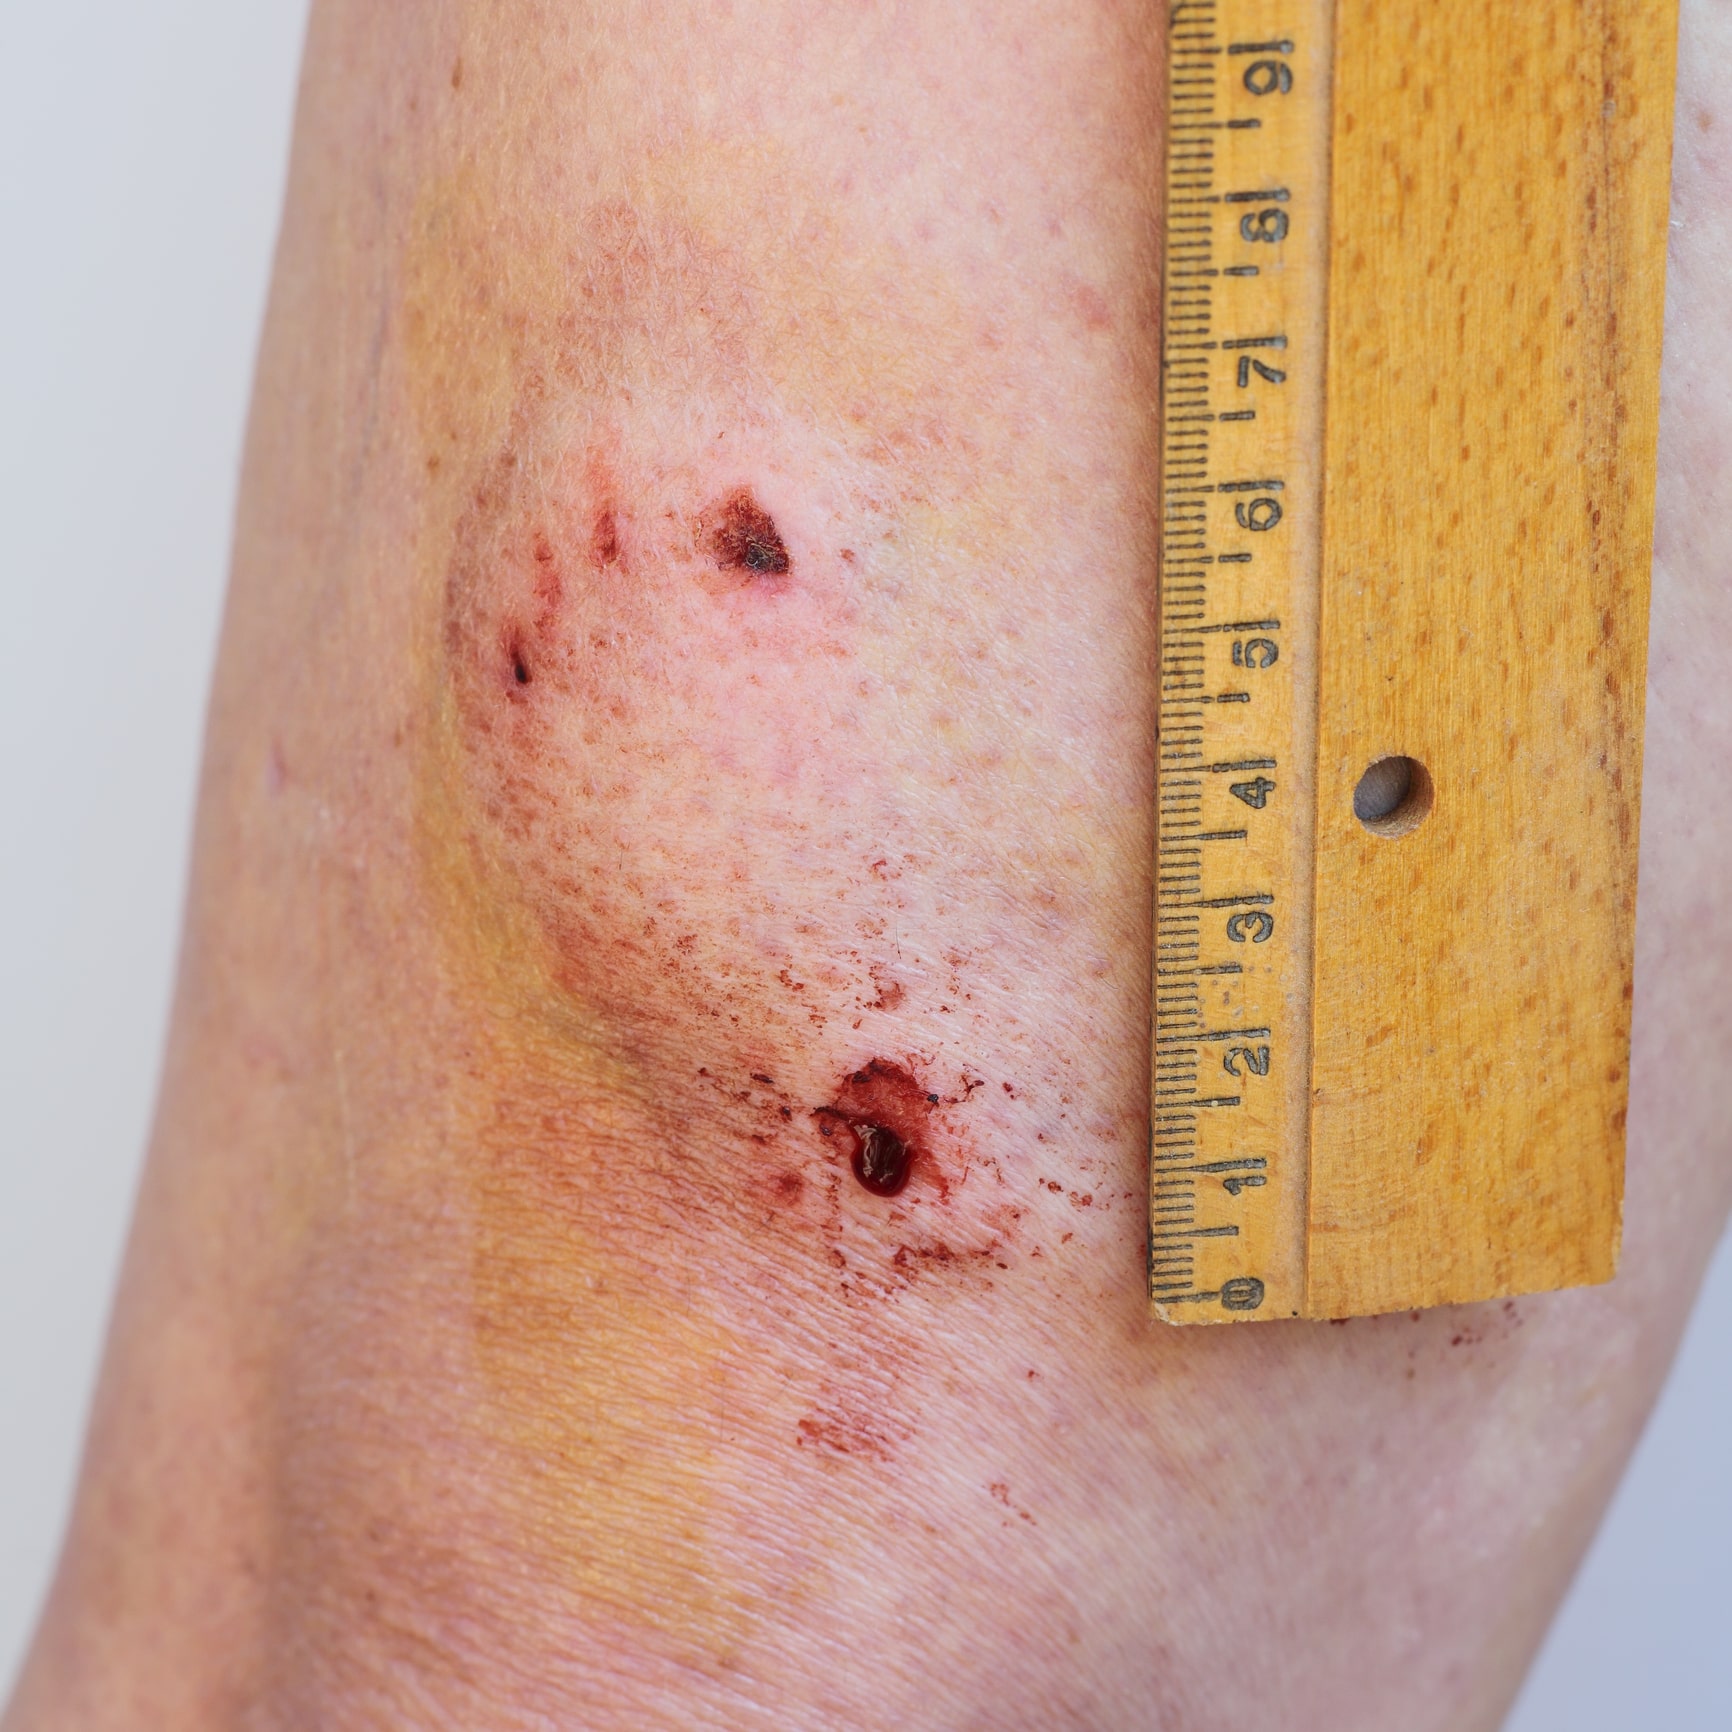 Person's arm showing dog bite puncture wound and ruler measuring size of wounded area